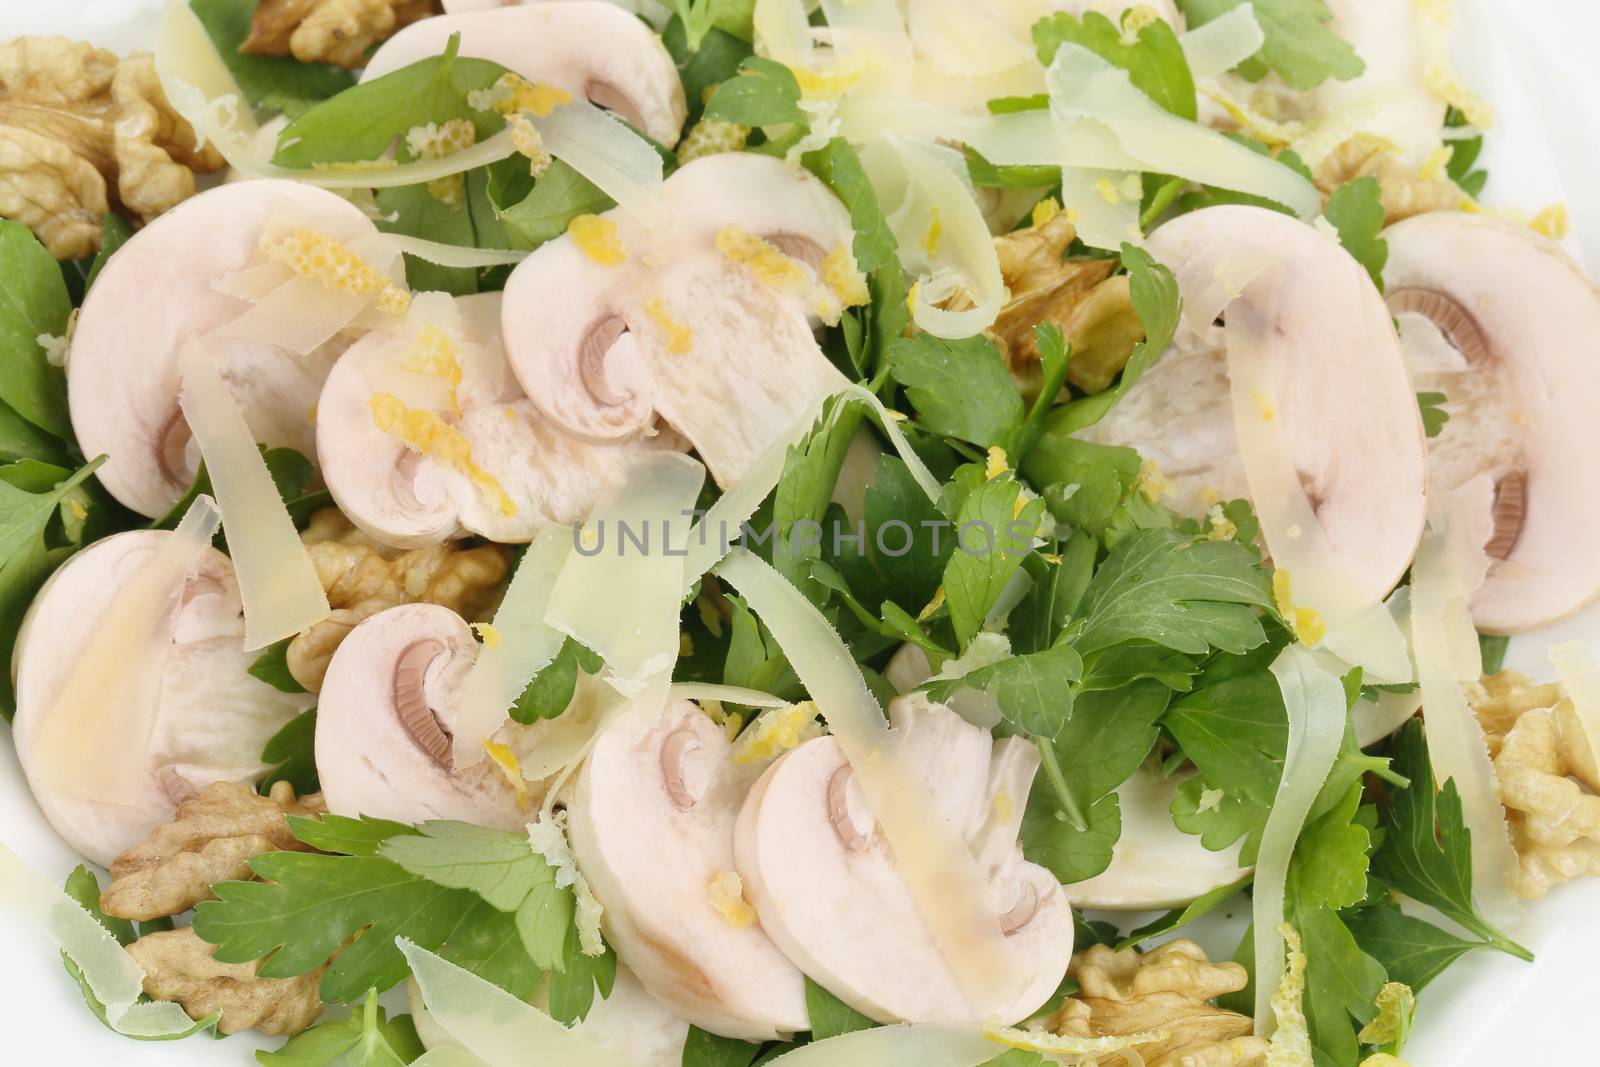 Mushroom salad with walnuts and parsley. Isolated on a white background.